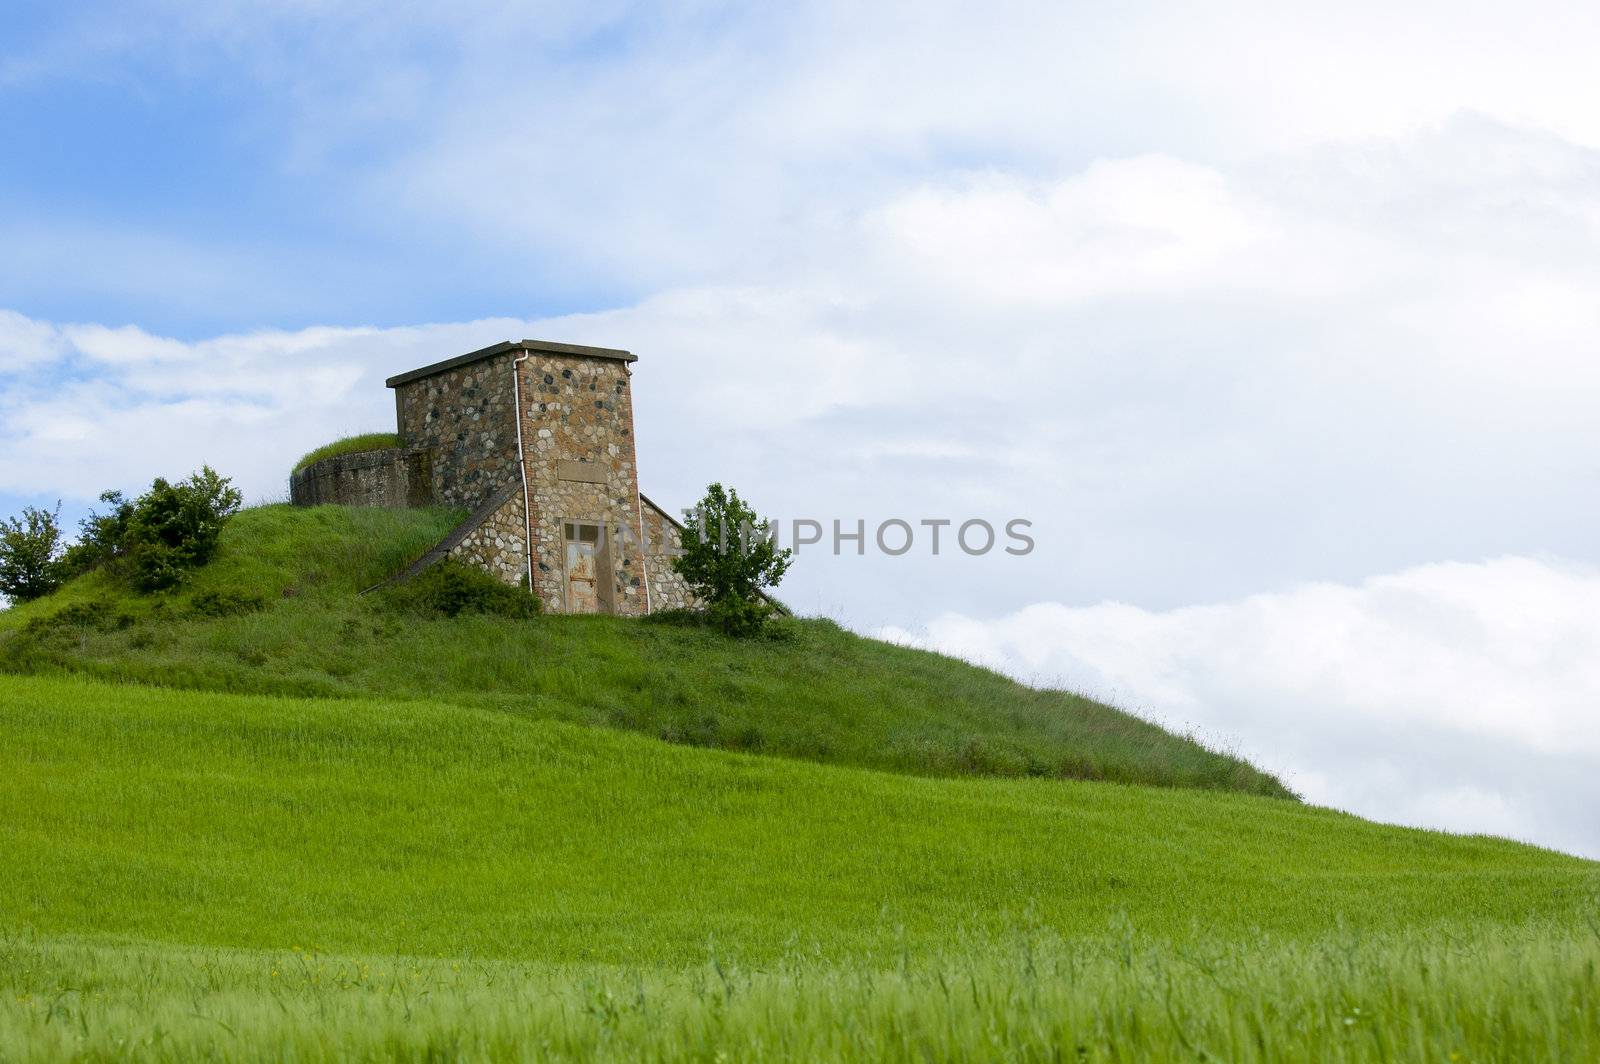 An aged house on top of a hill